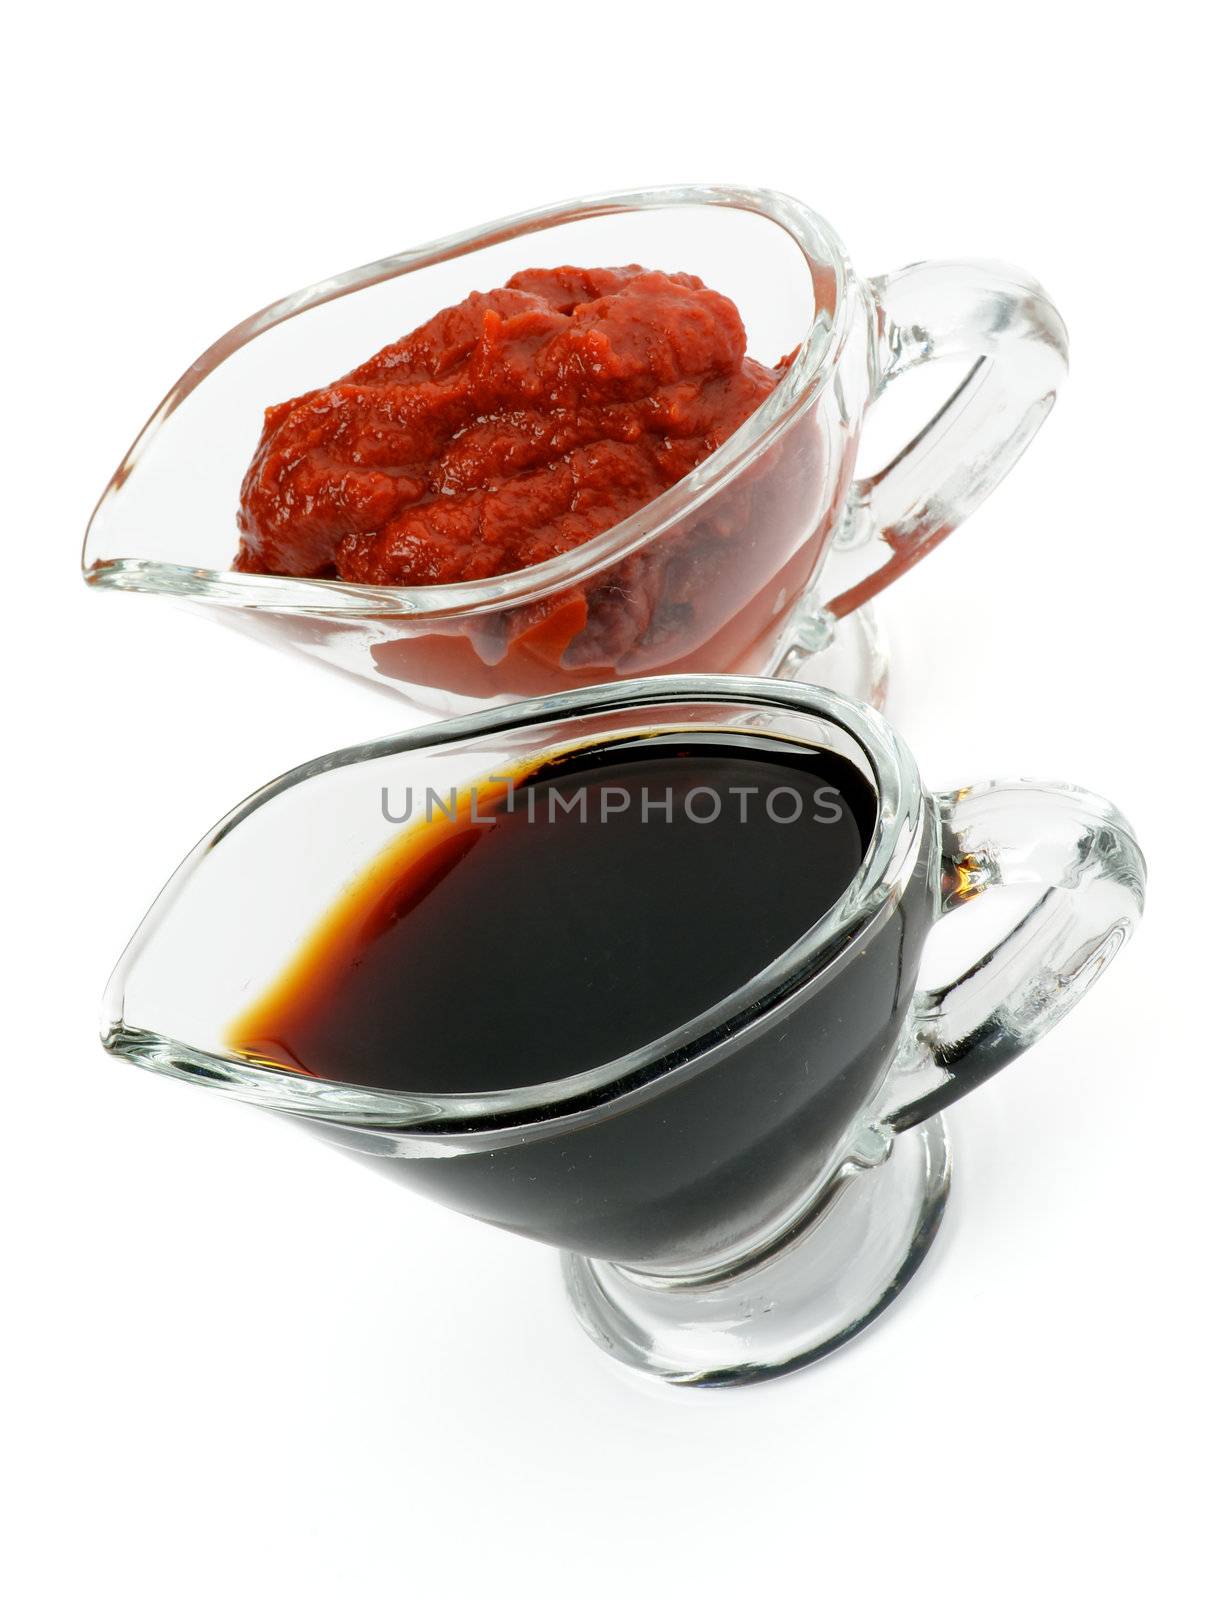 Two Sauces by zhekos